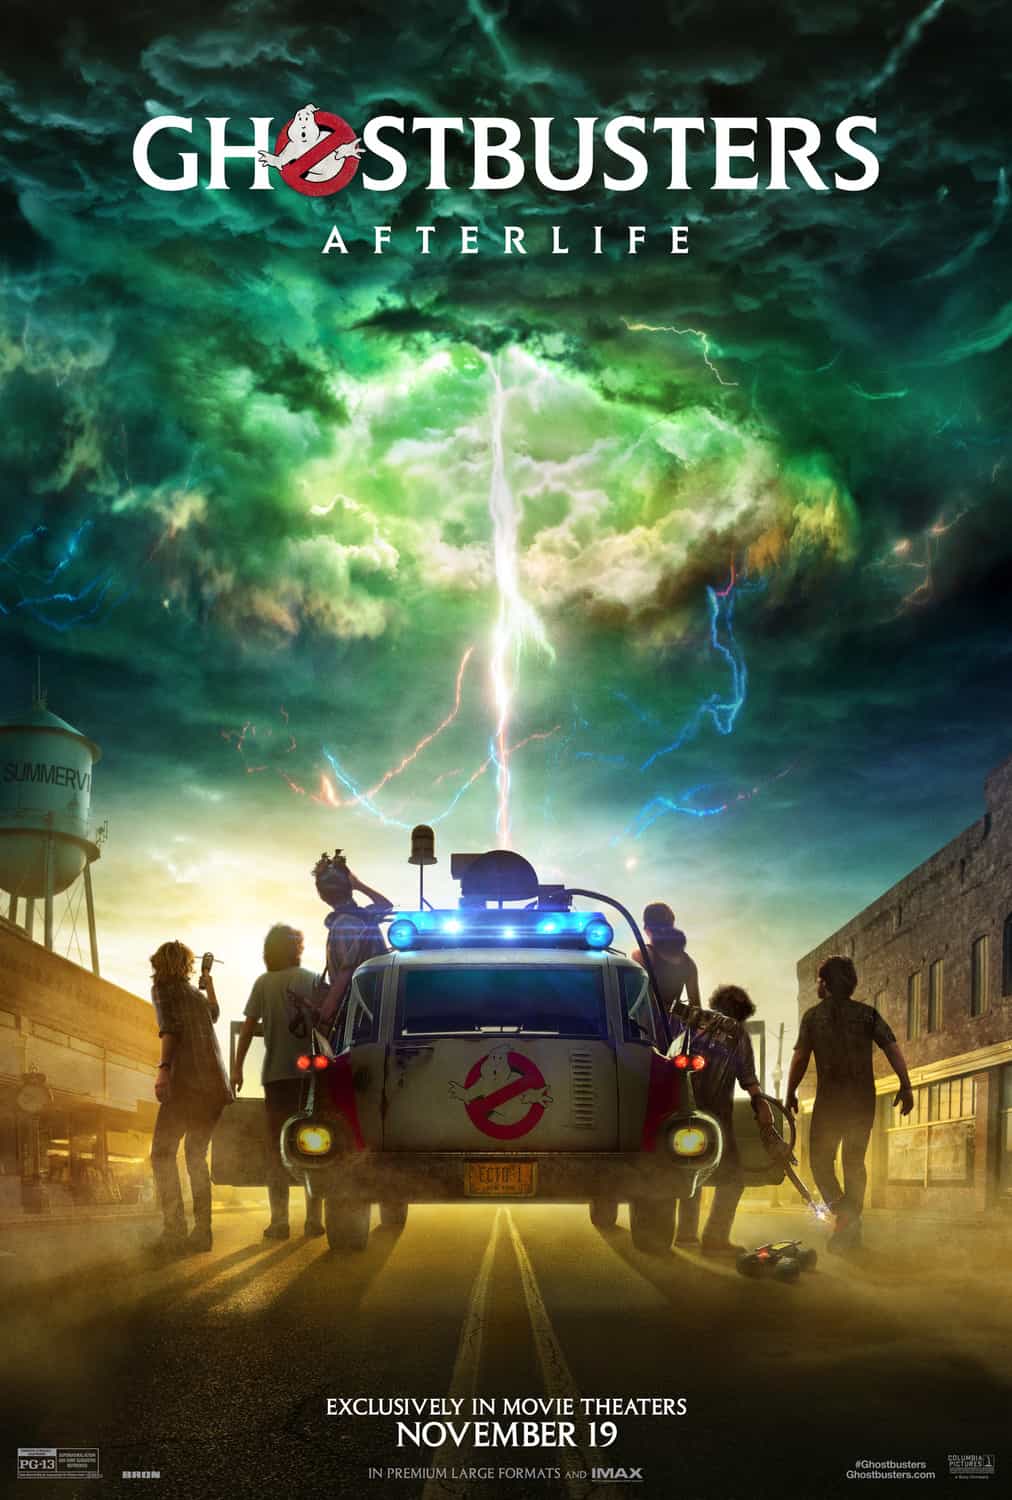 UK new movie preview weekend Friday 19th November 2021 - Ghostbusters: Afterlife, The Battle At Lake Changjin and King Richard